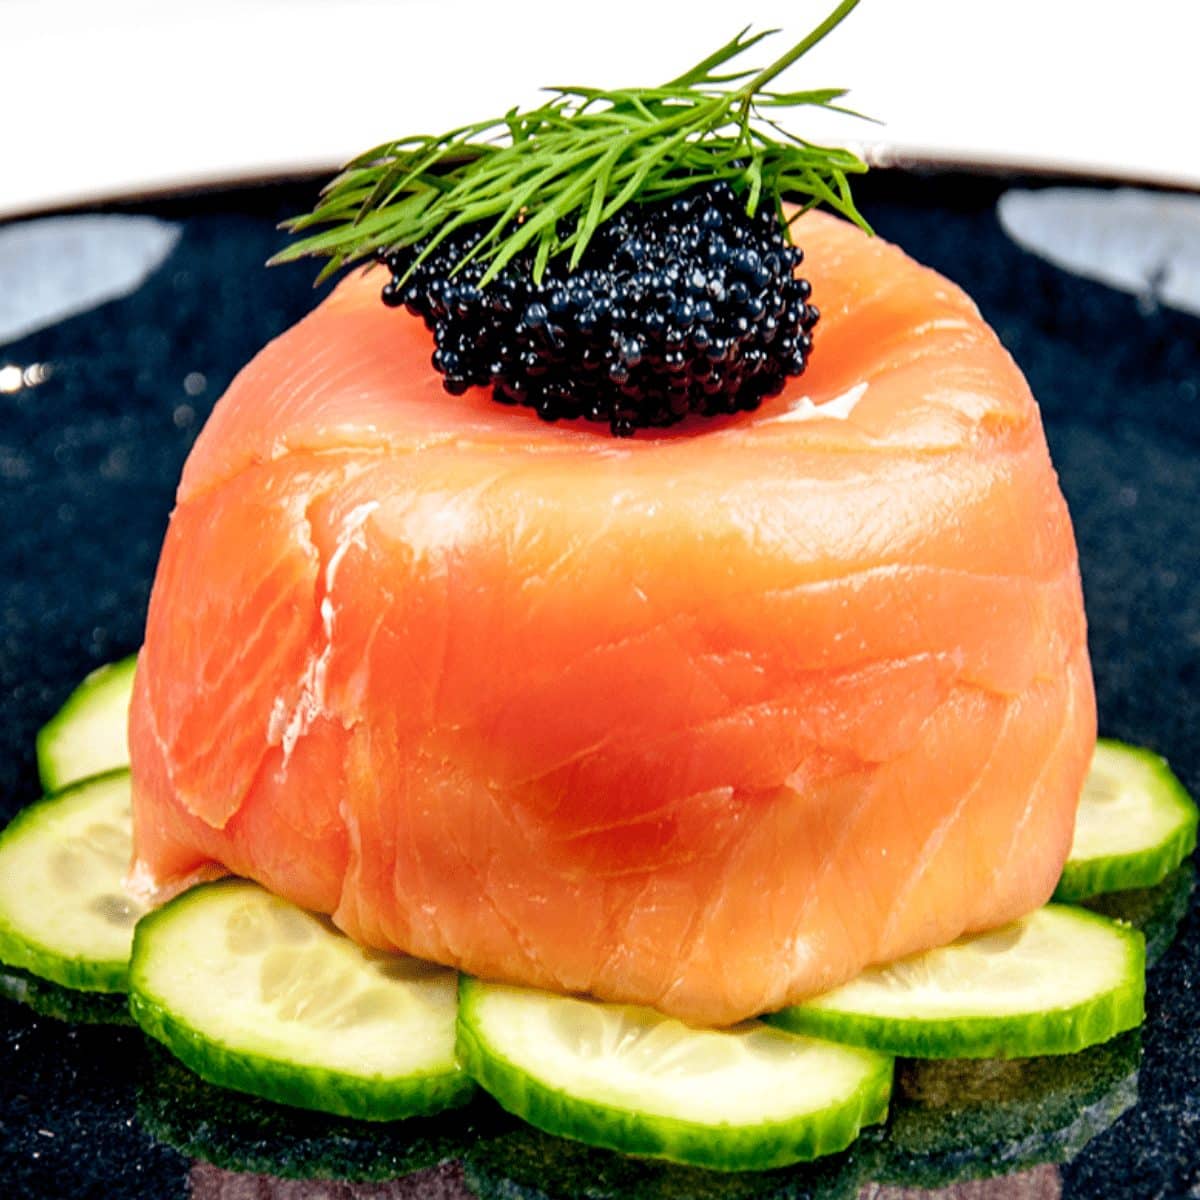 Just look at this individual smoked salmon terrine. I love this recipe. So tasty and a dish that will impress your friends at any dinner party. Hot and cold smoked salmon, cream cheese with chives, and even topped with a little caviar. Yum! | theyumyumclub.com